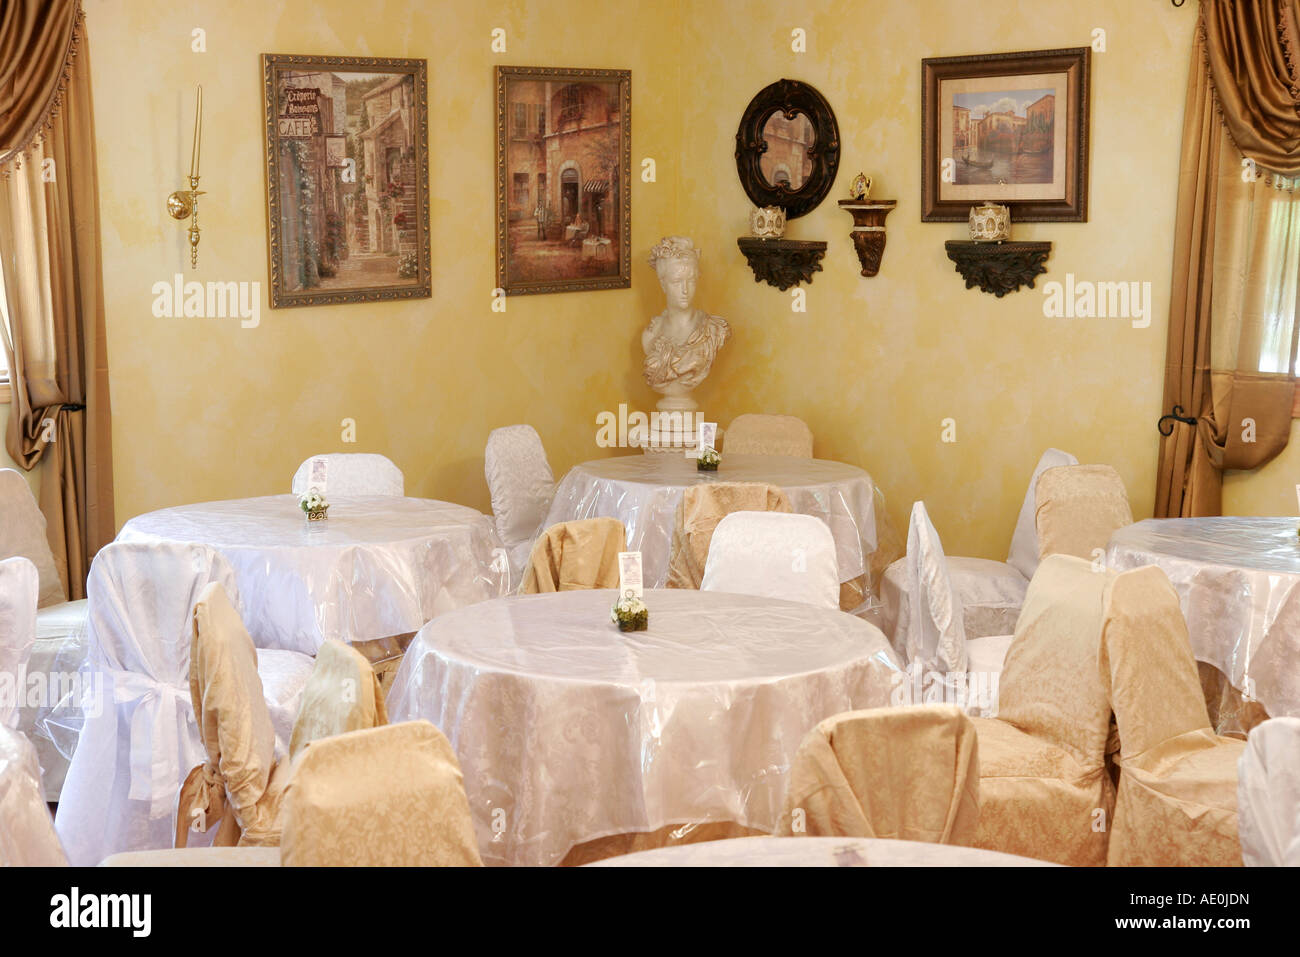 Valparaiso Indiana,Victorian Manor Spa and Cafe,covered tables,chairs,Restaurant interior,visitors travel traveling tour tourist tourism landmark land Stock Photo